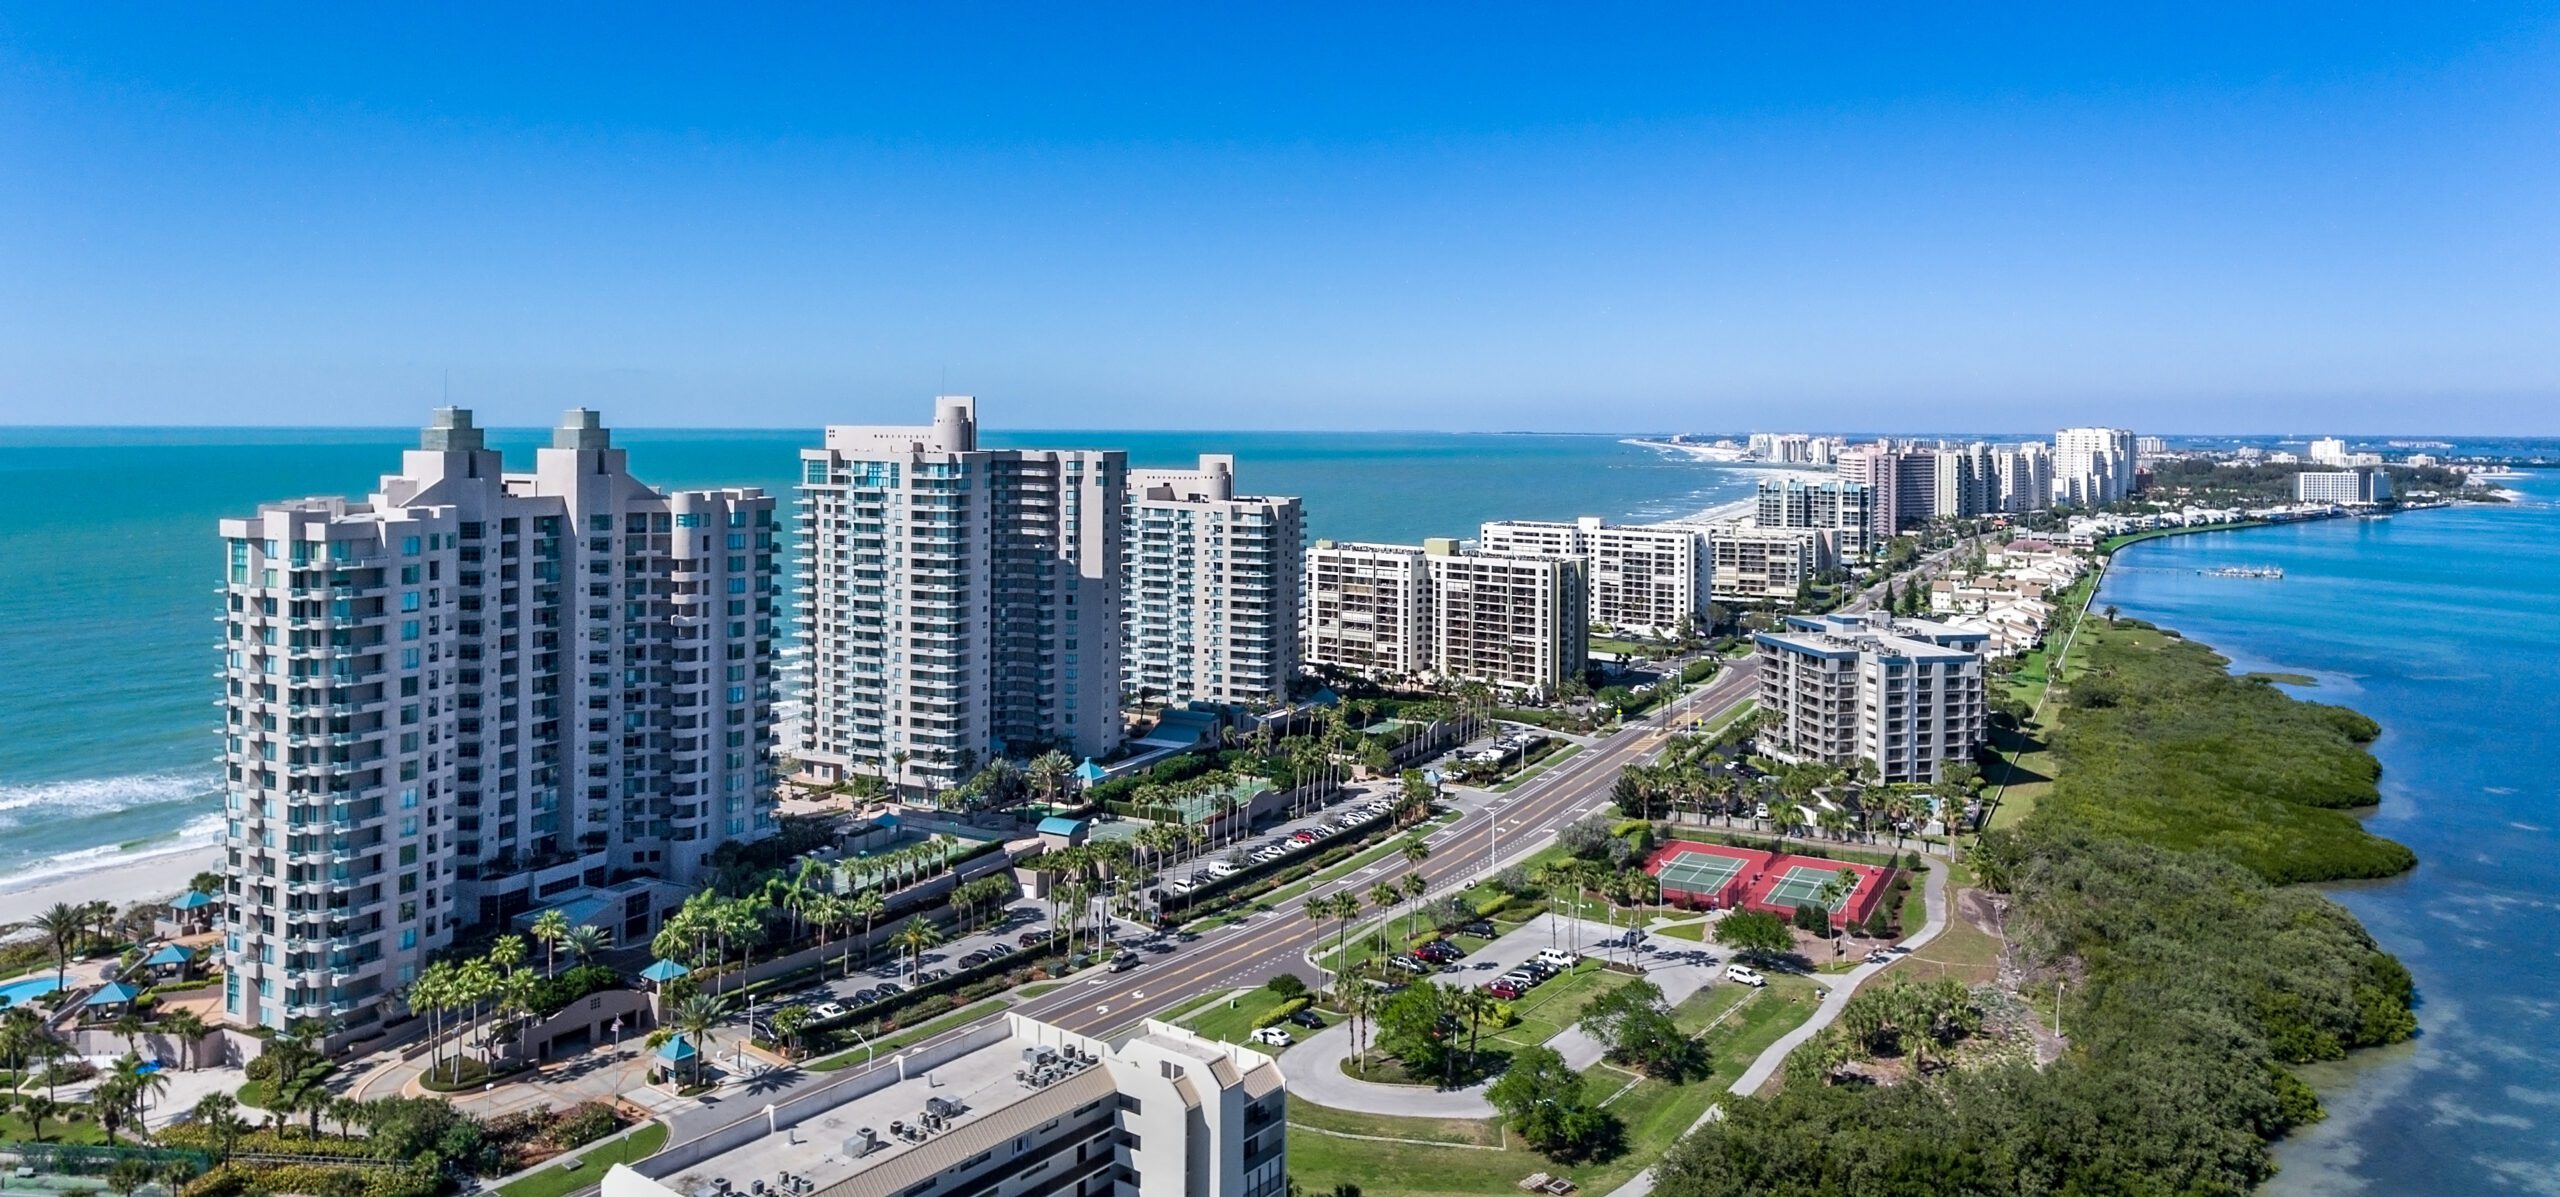 an aerial view of the city of clearwater beach with the ocean